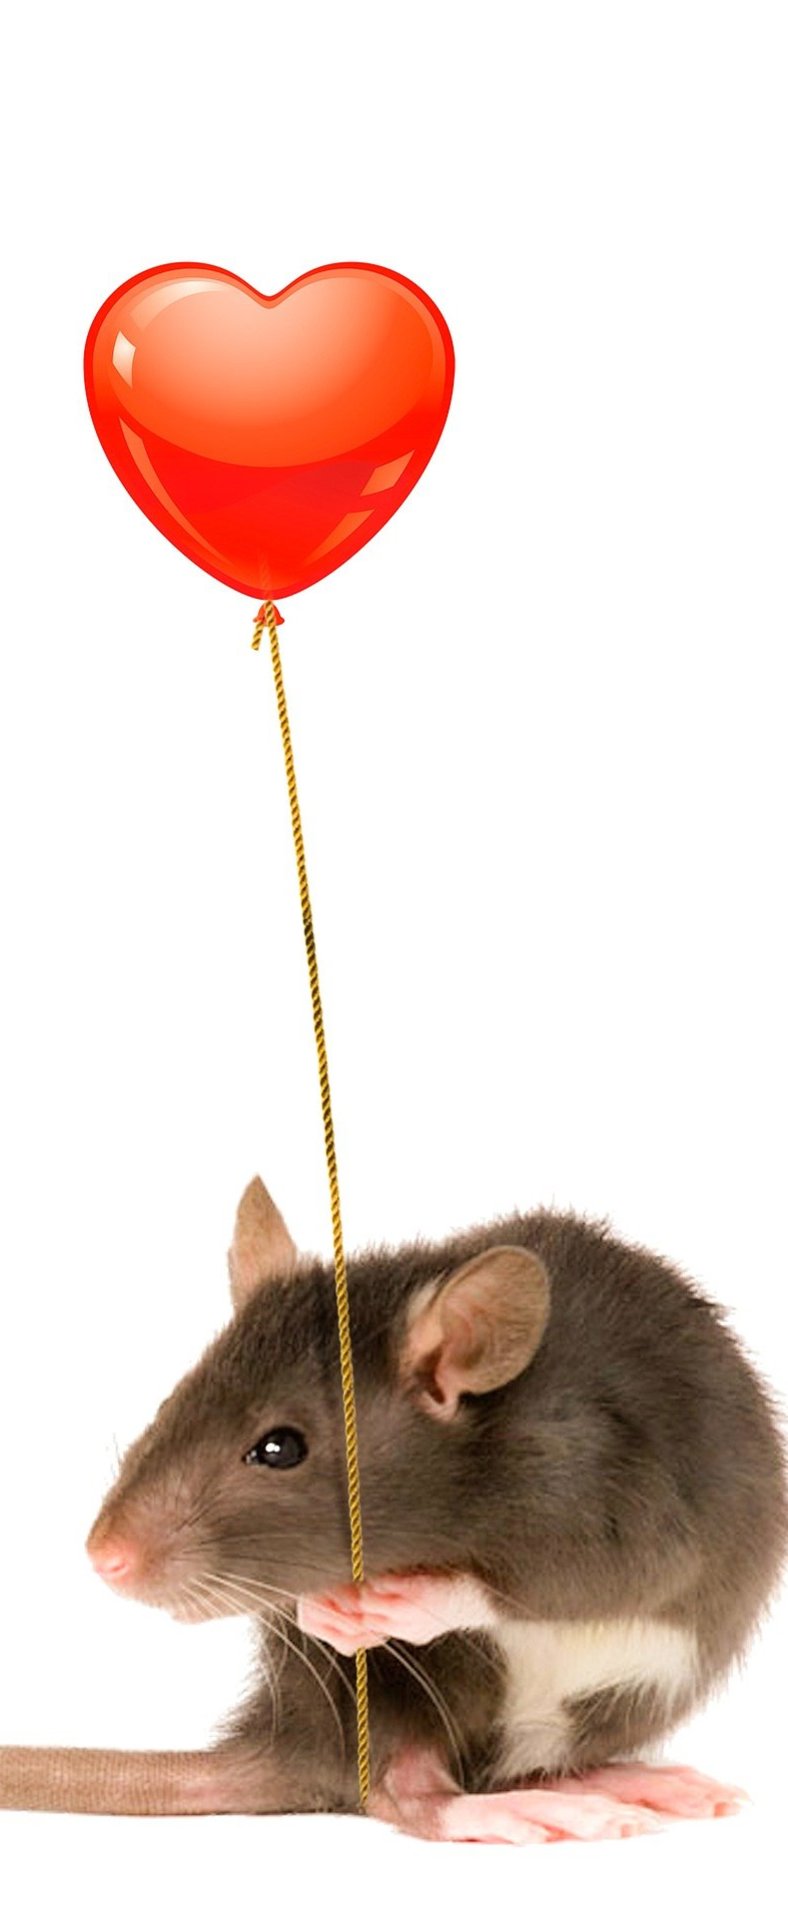 Rat with a heart